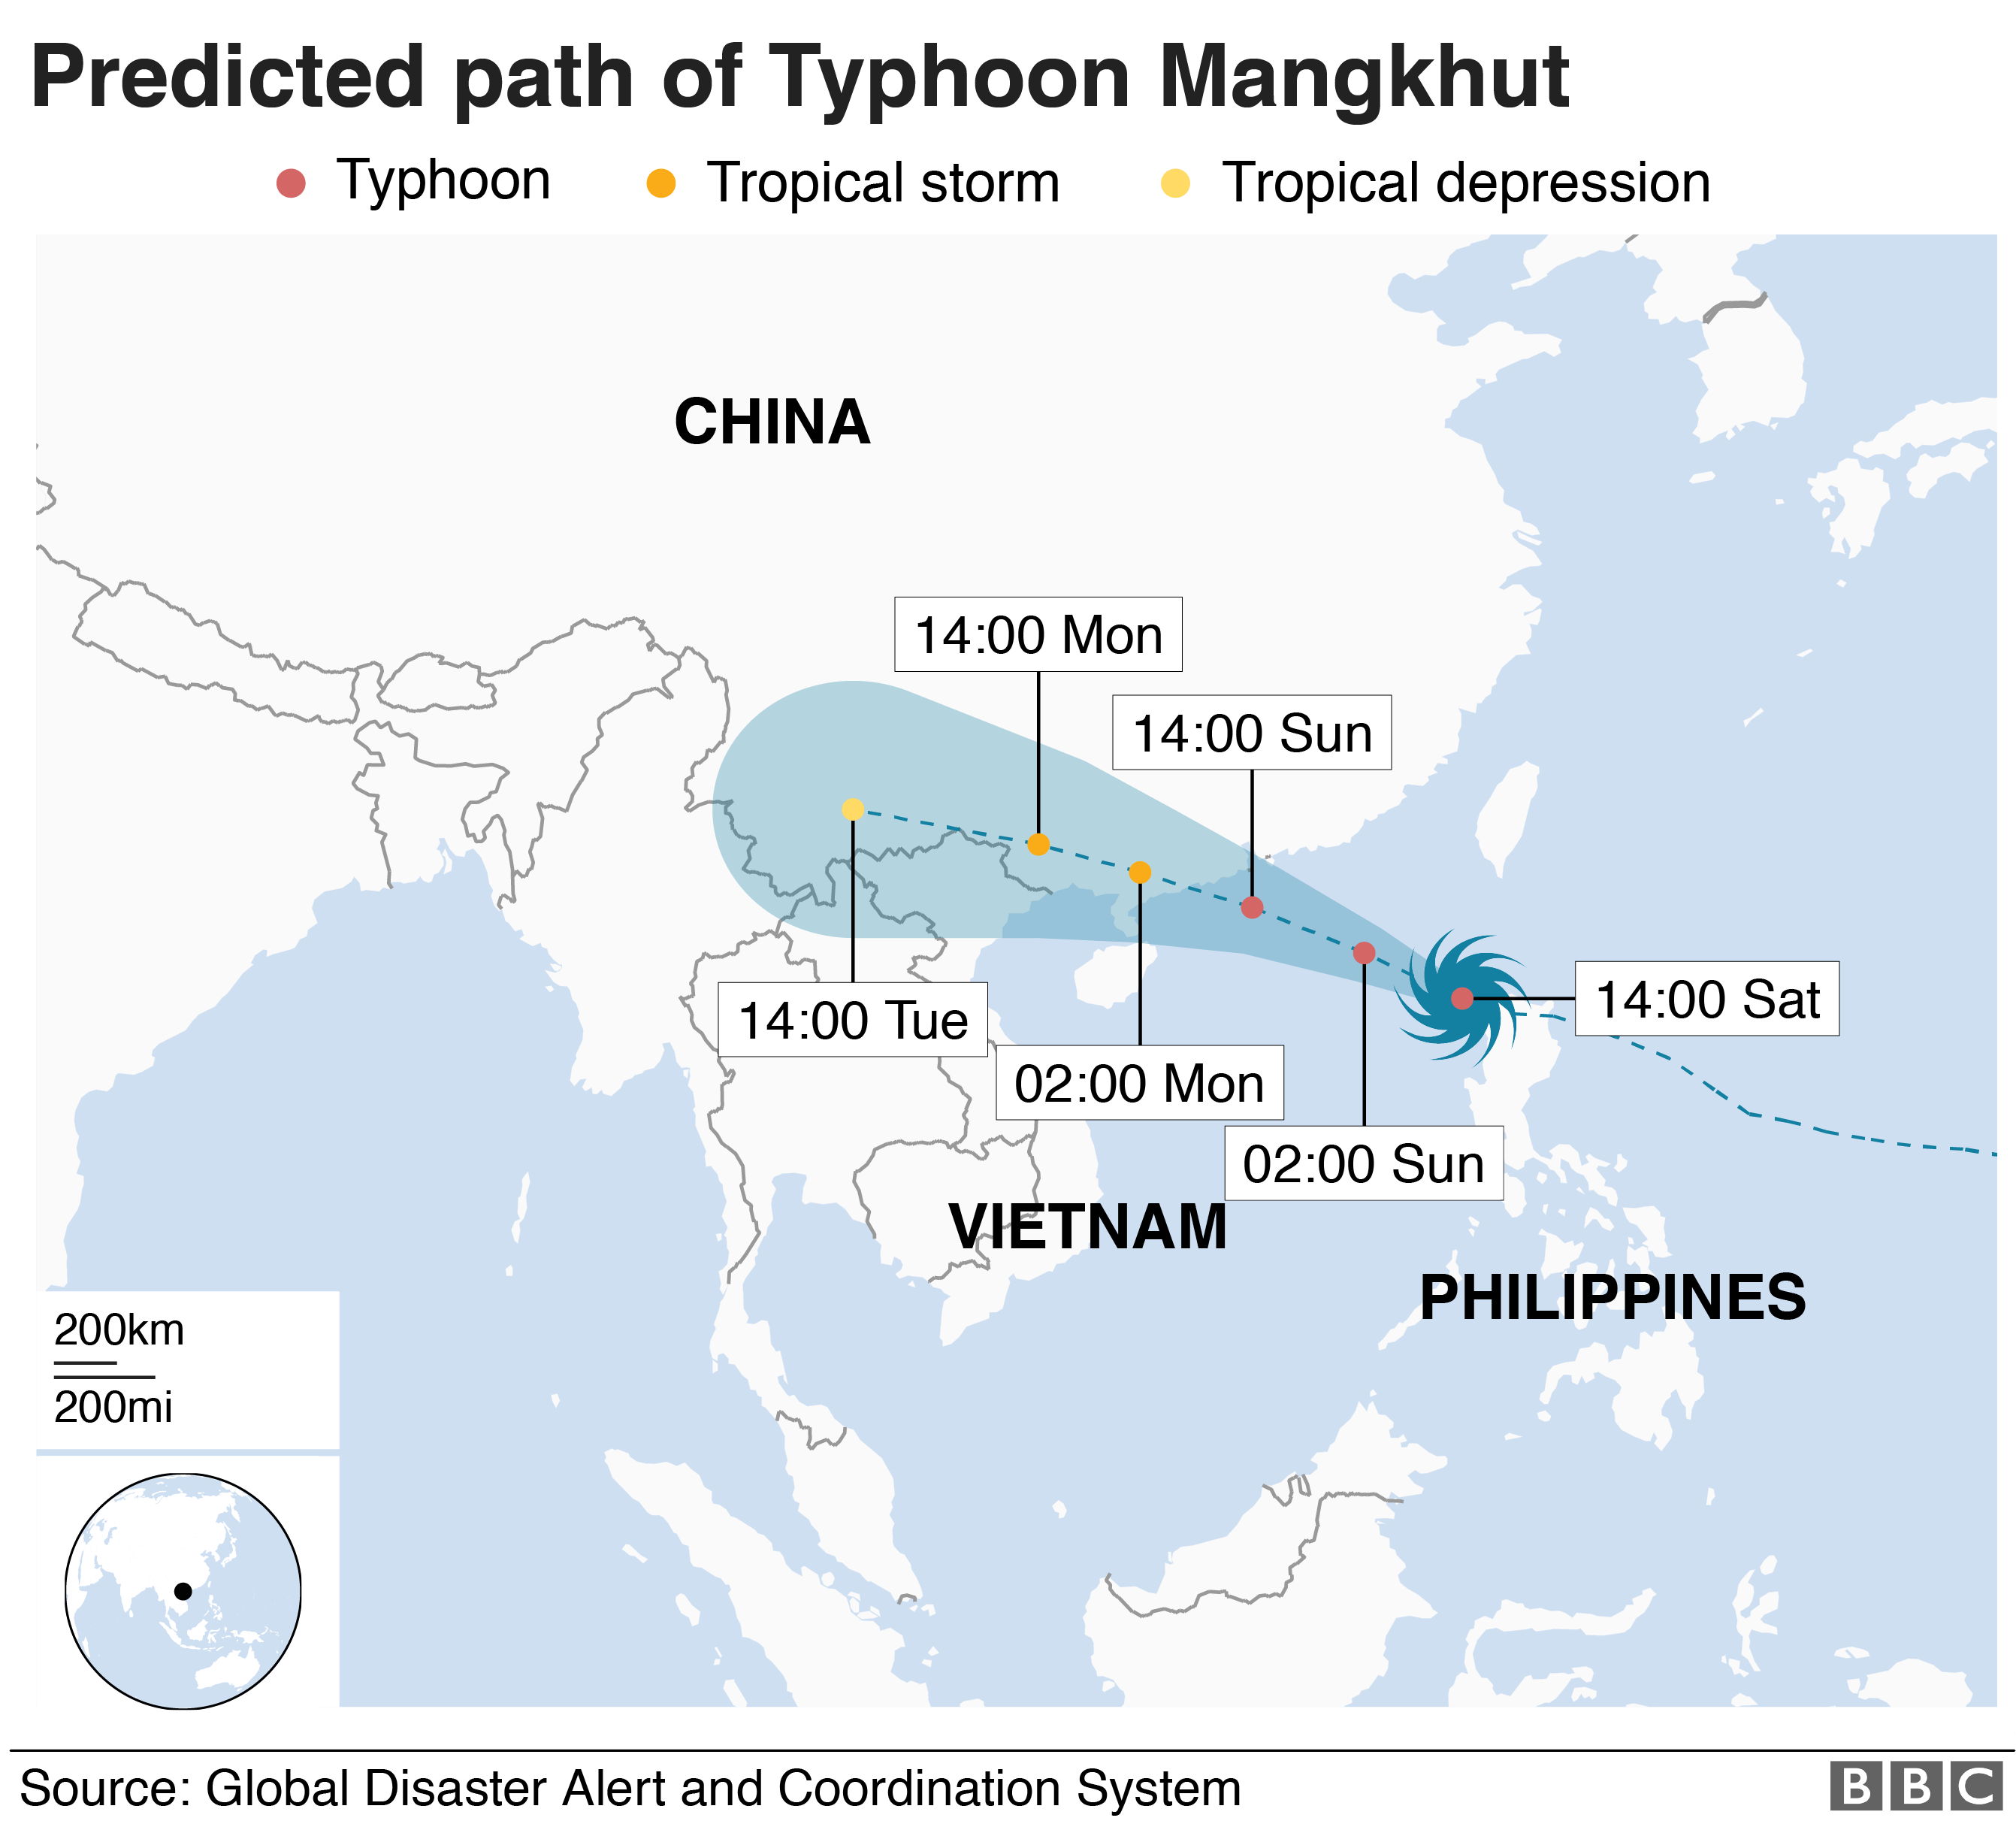 Predict path of Typhoon Mangkhut which will make landfall